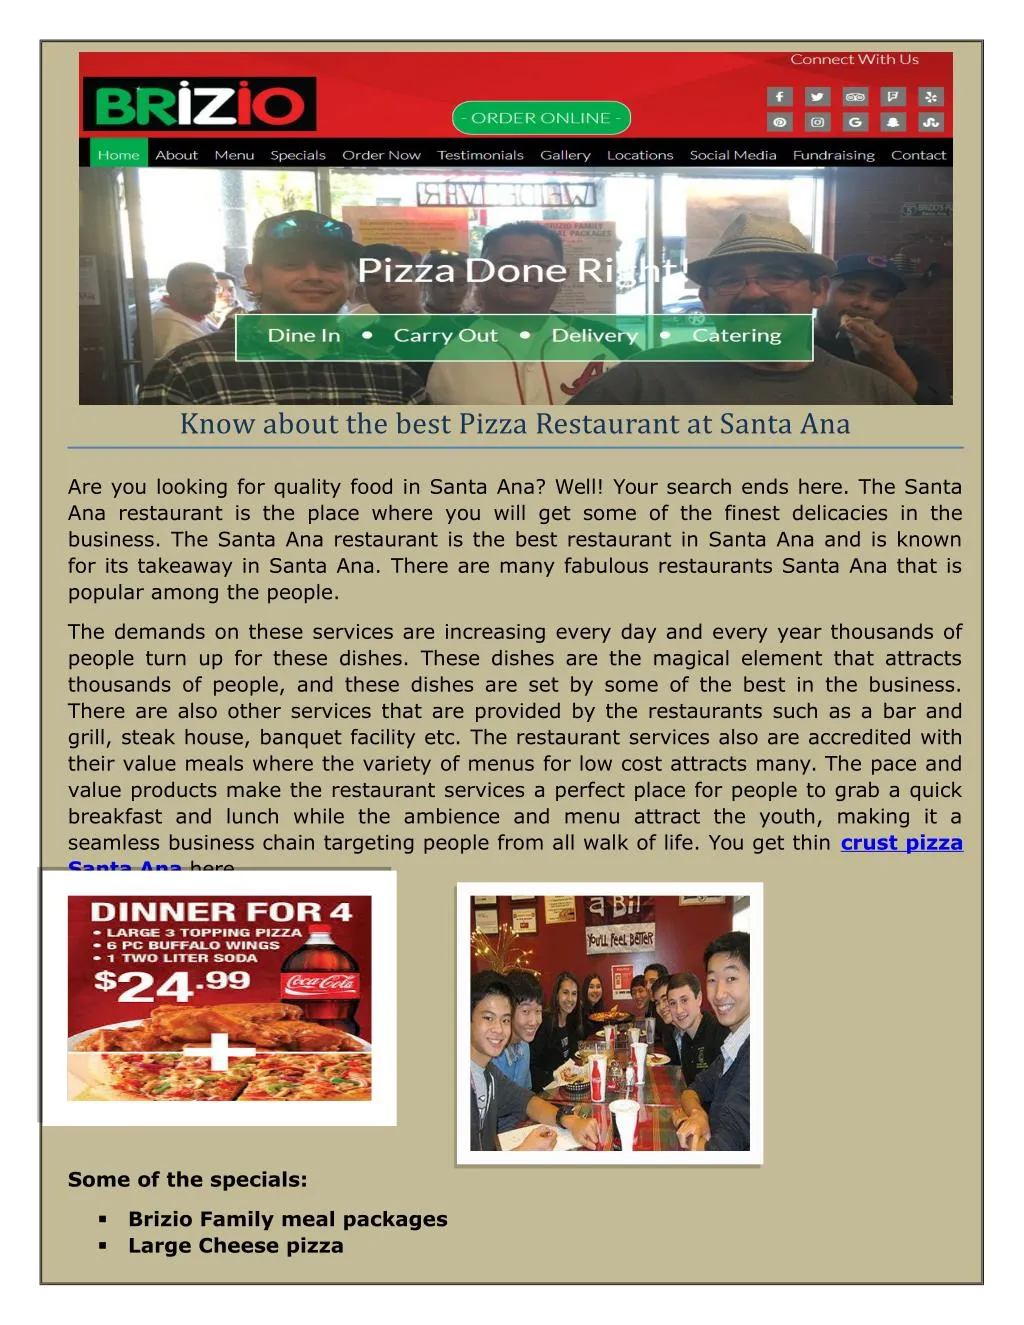 know about the best pizza restaurant at santa ana